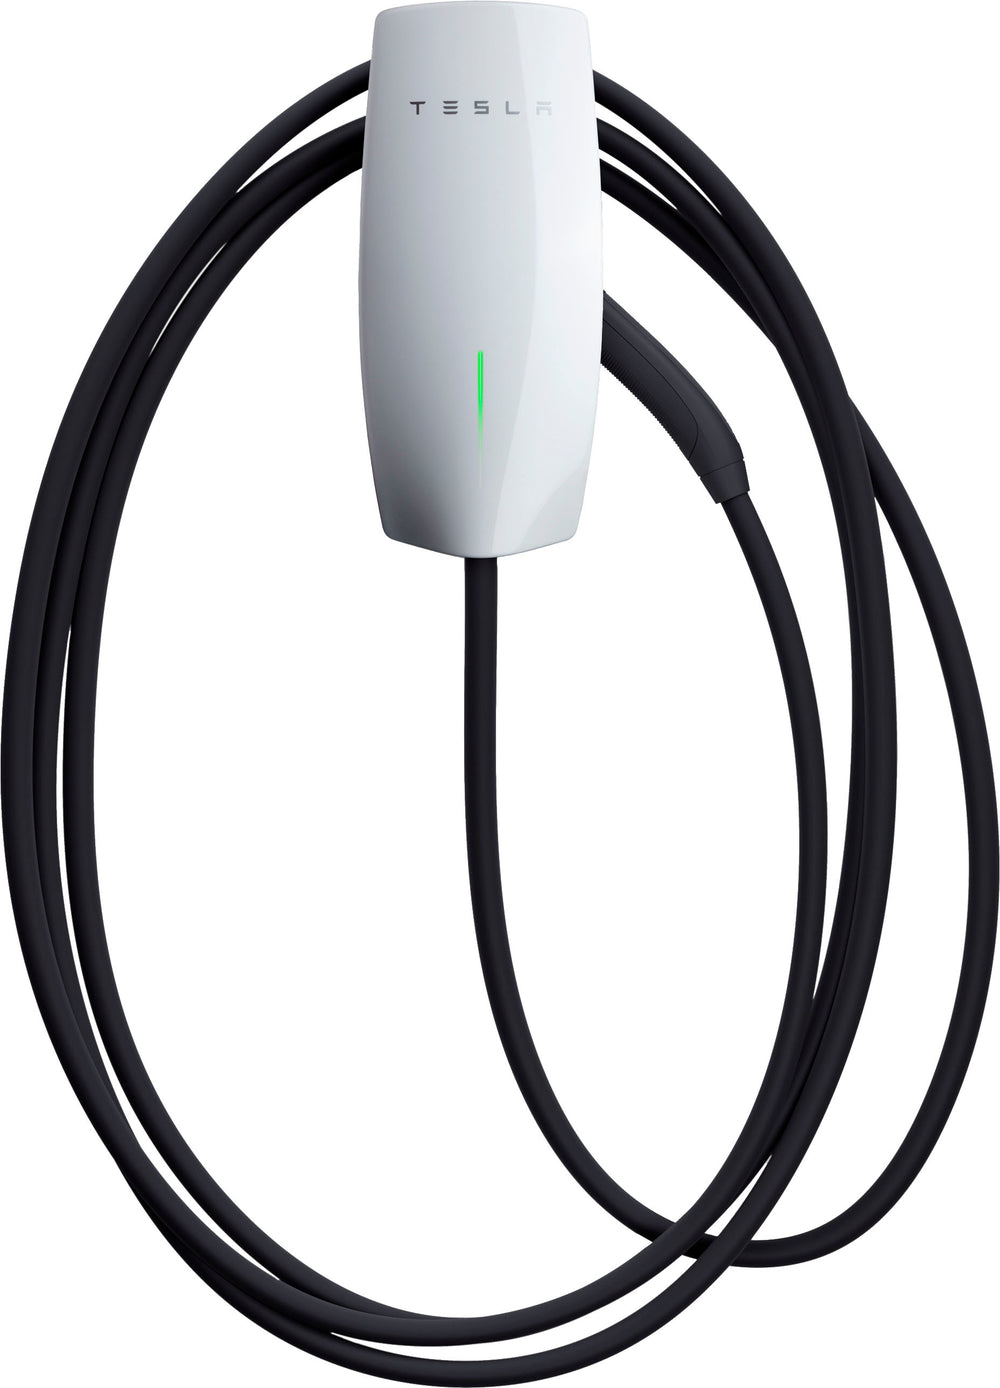 Tesla - Wall Connector Hardwired Electric Vehicle (EV) Charger up to 48A - 24' - White_1